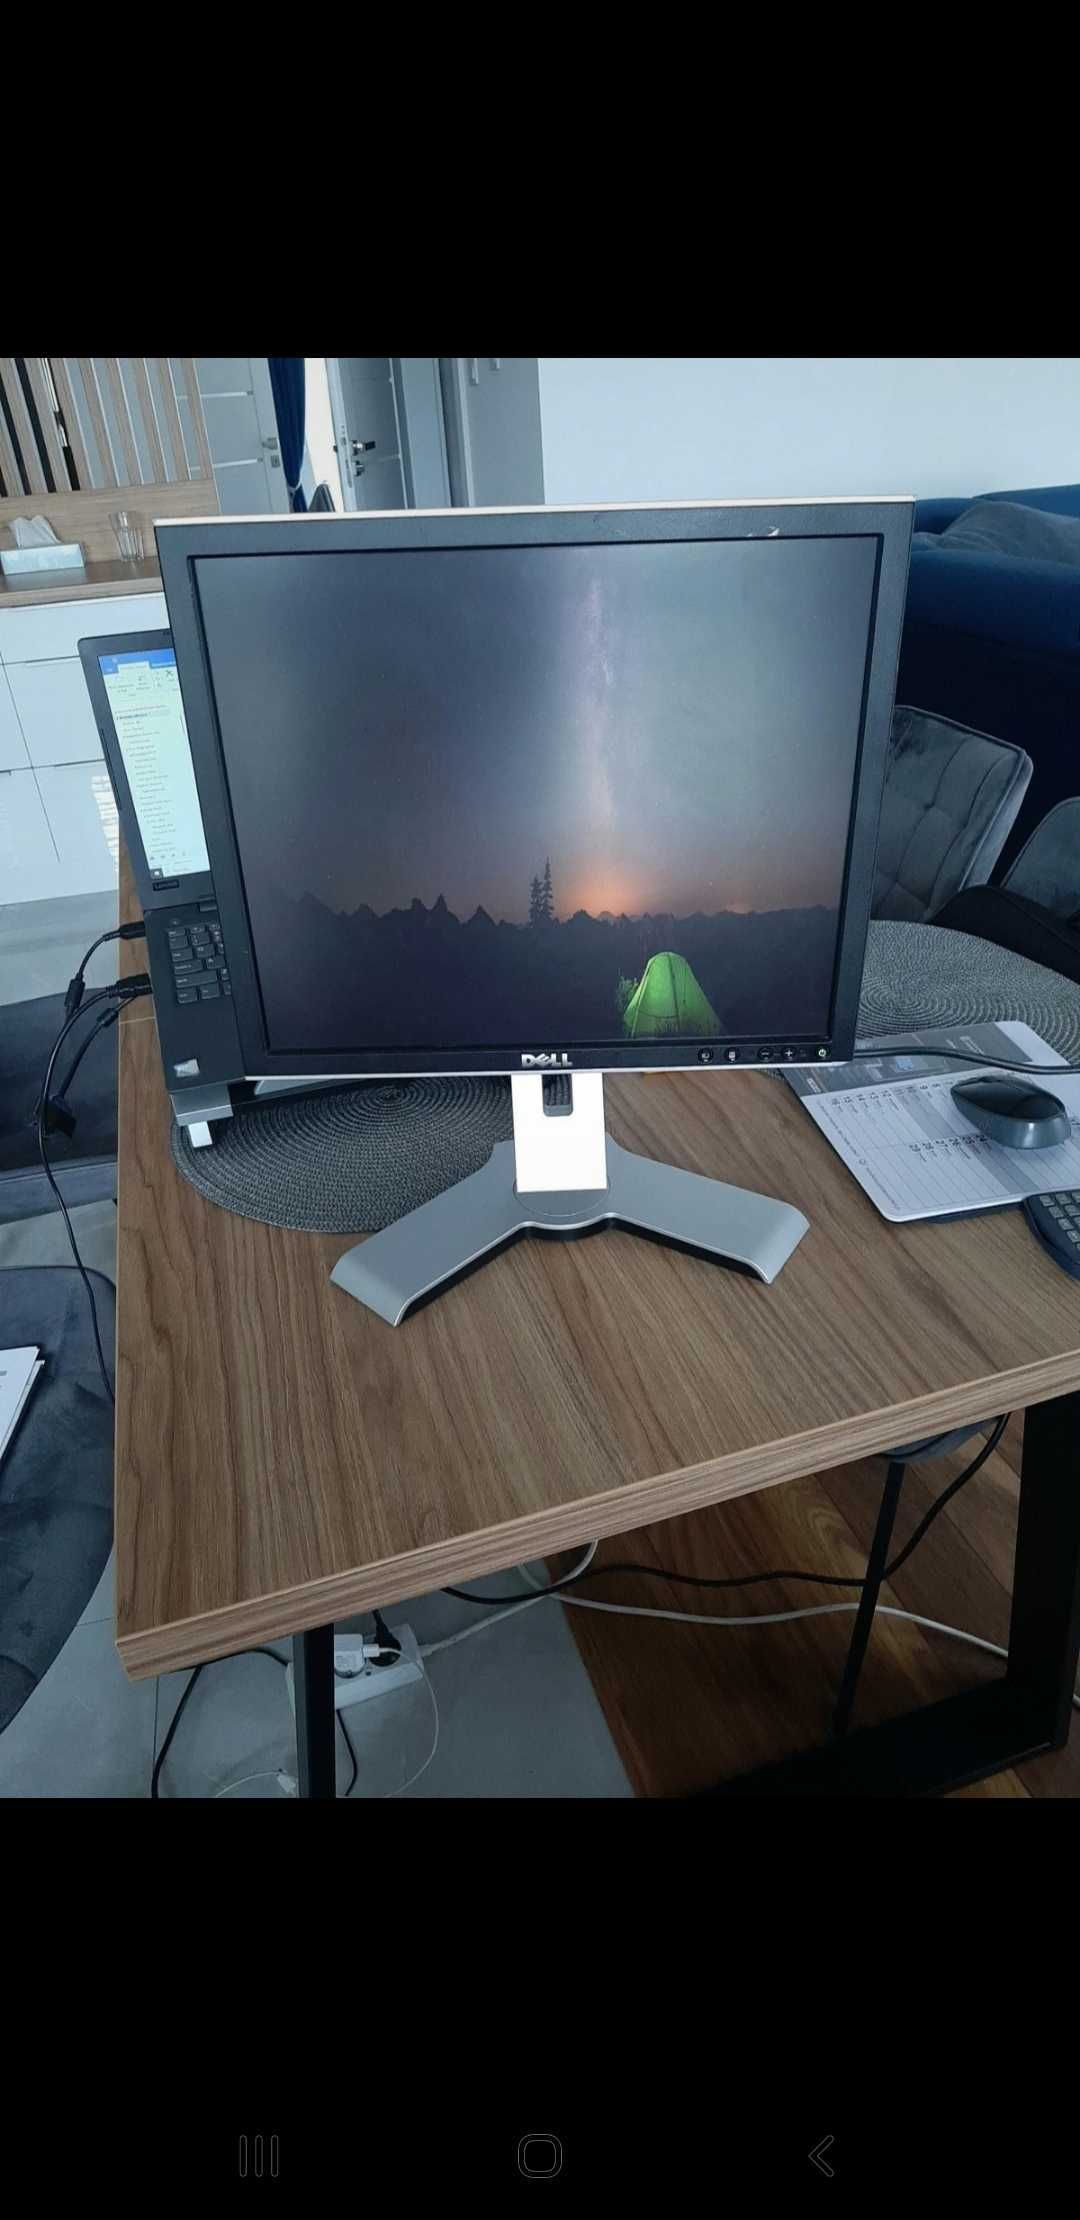 Monitor LCD 17" DELL 1708FPt